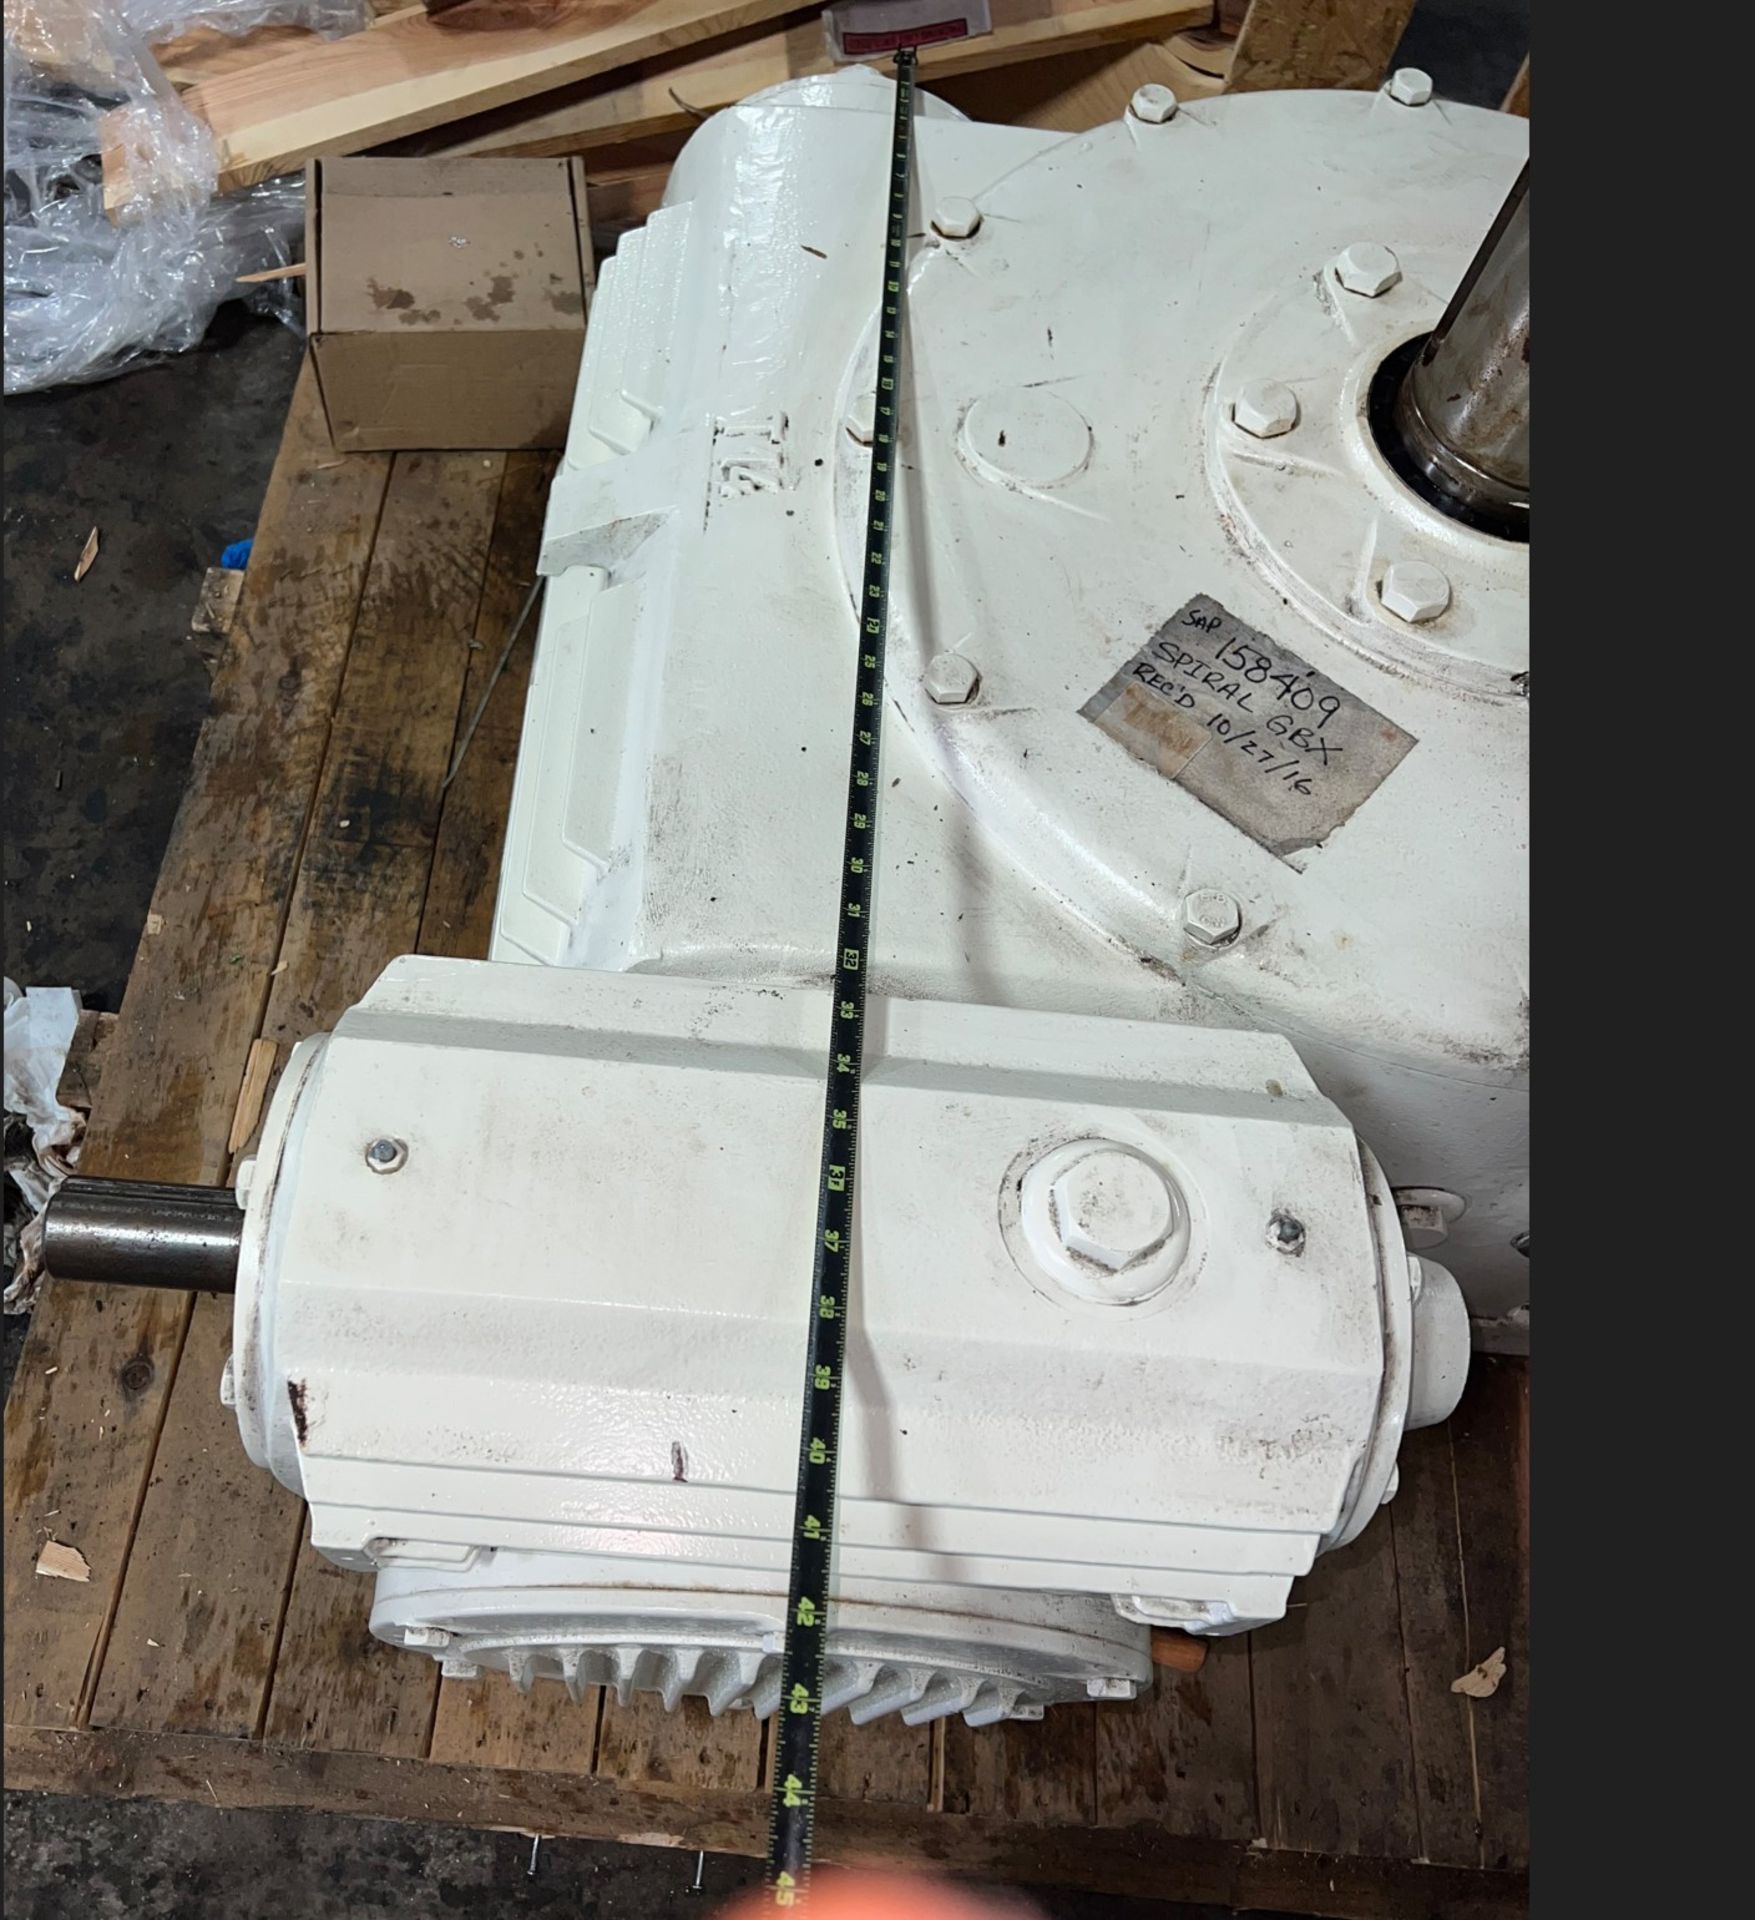 Never Used Spiral Freezer Gear Box - Large item 2500-pound, with 5" output shaft, 1.75" input shaft. - Image 7 of 12